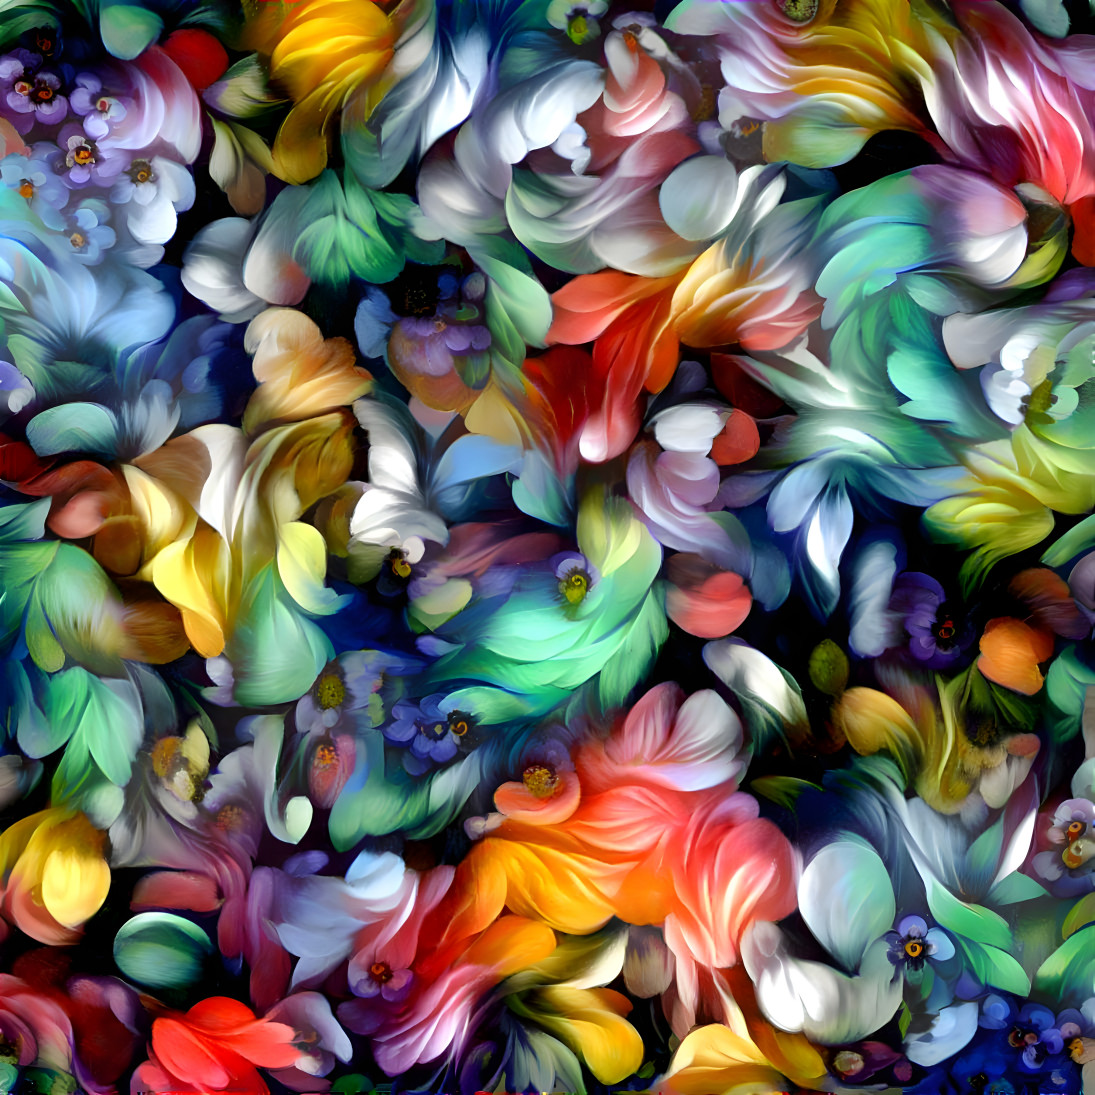 Floral essence. Style transfer on zoomed noise